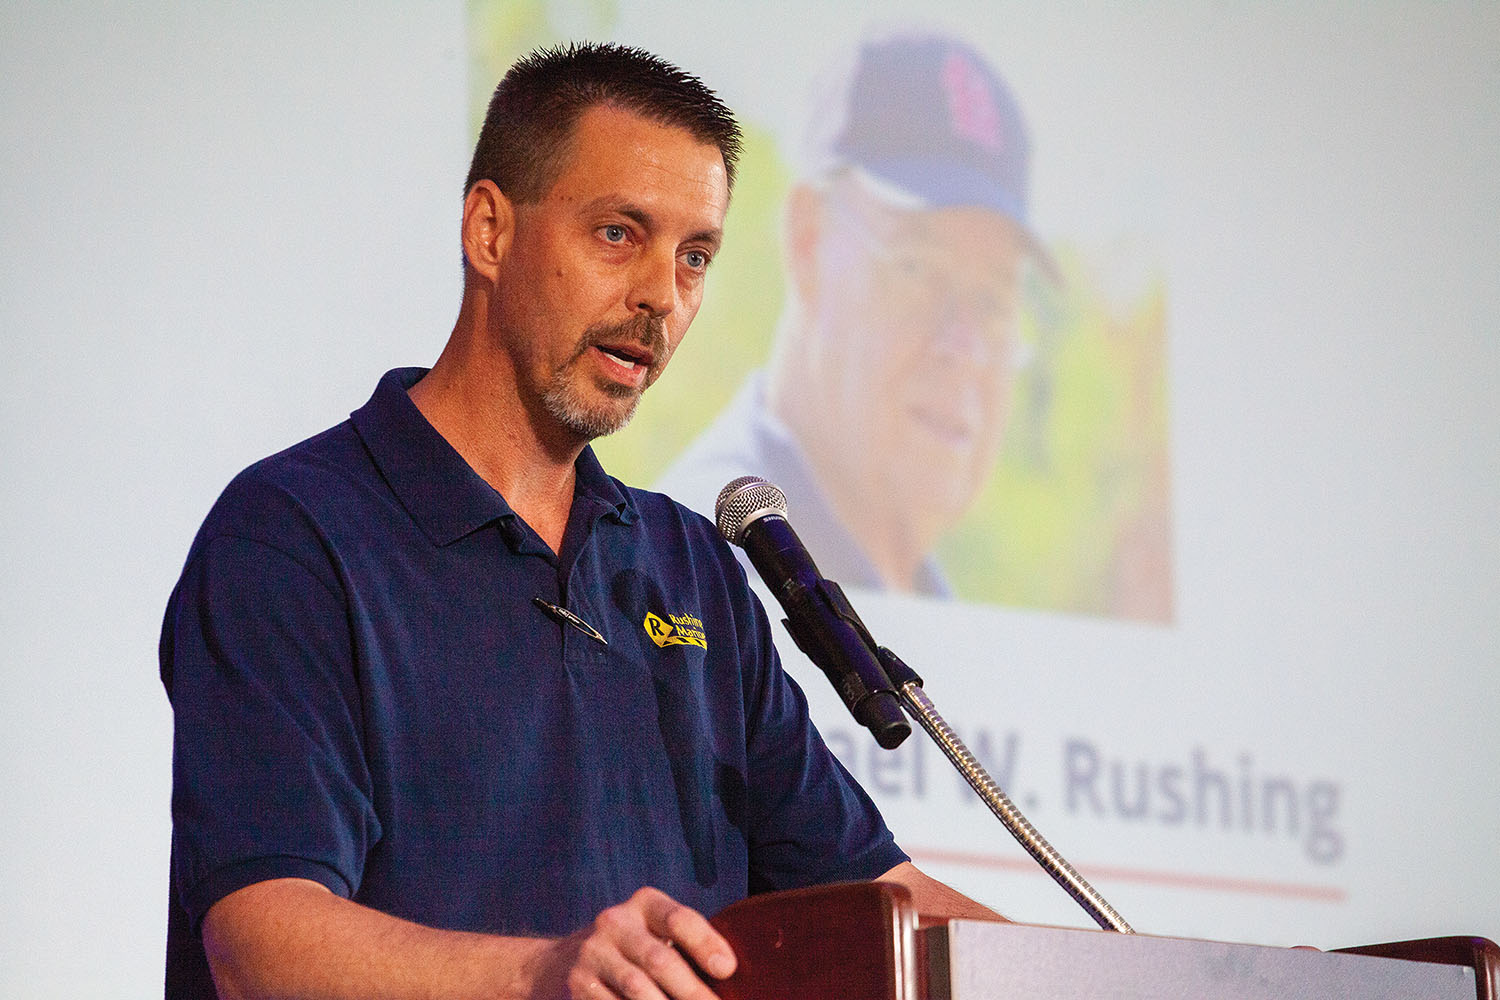 Todd Rushing speaks during ceremony honoring his father, the late Michael Rushing, at the Inland Marine Expo. (Photo by Frank McCormack)